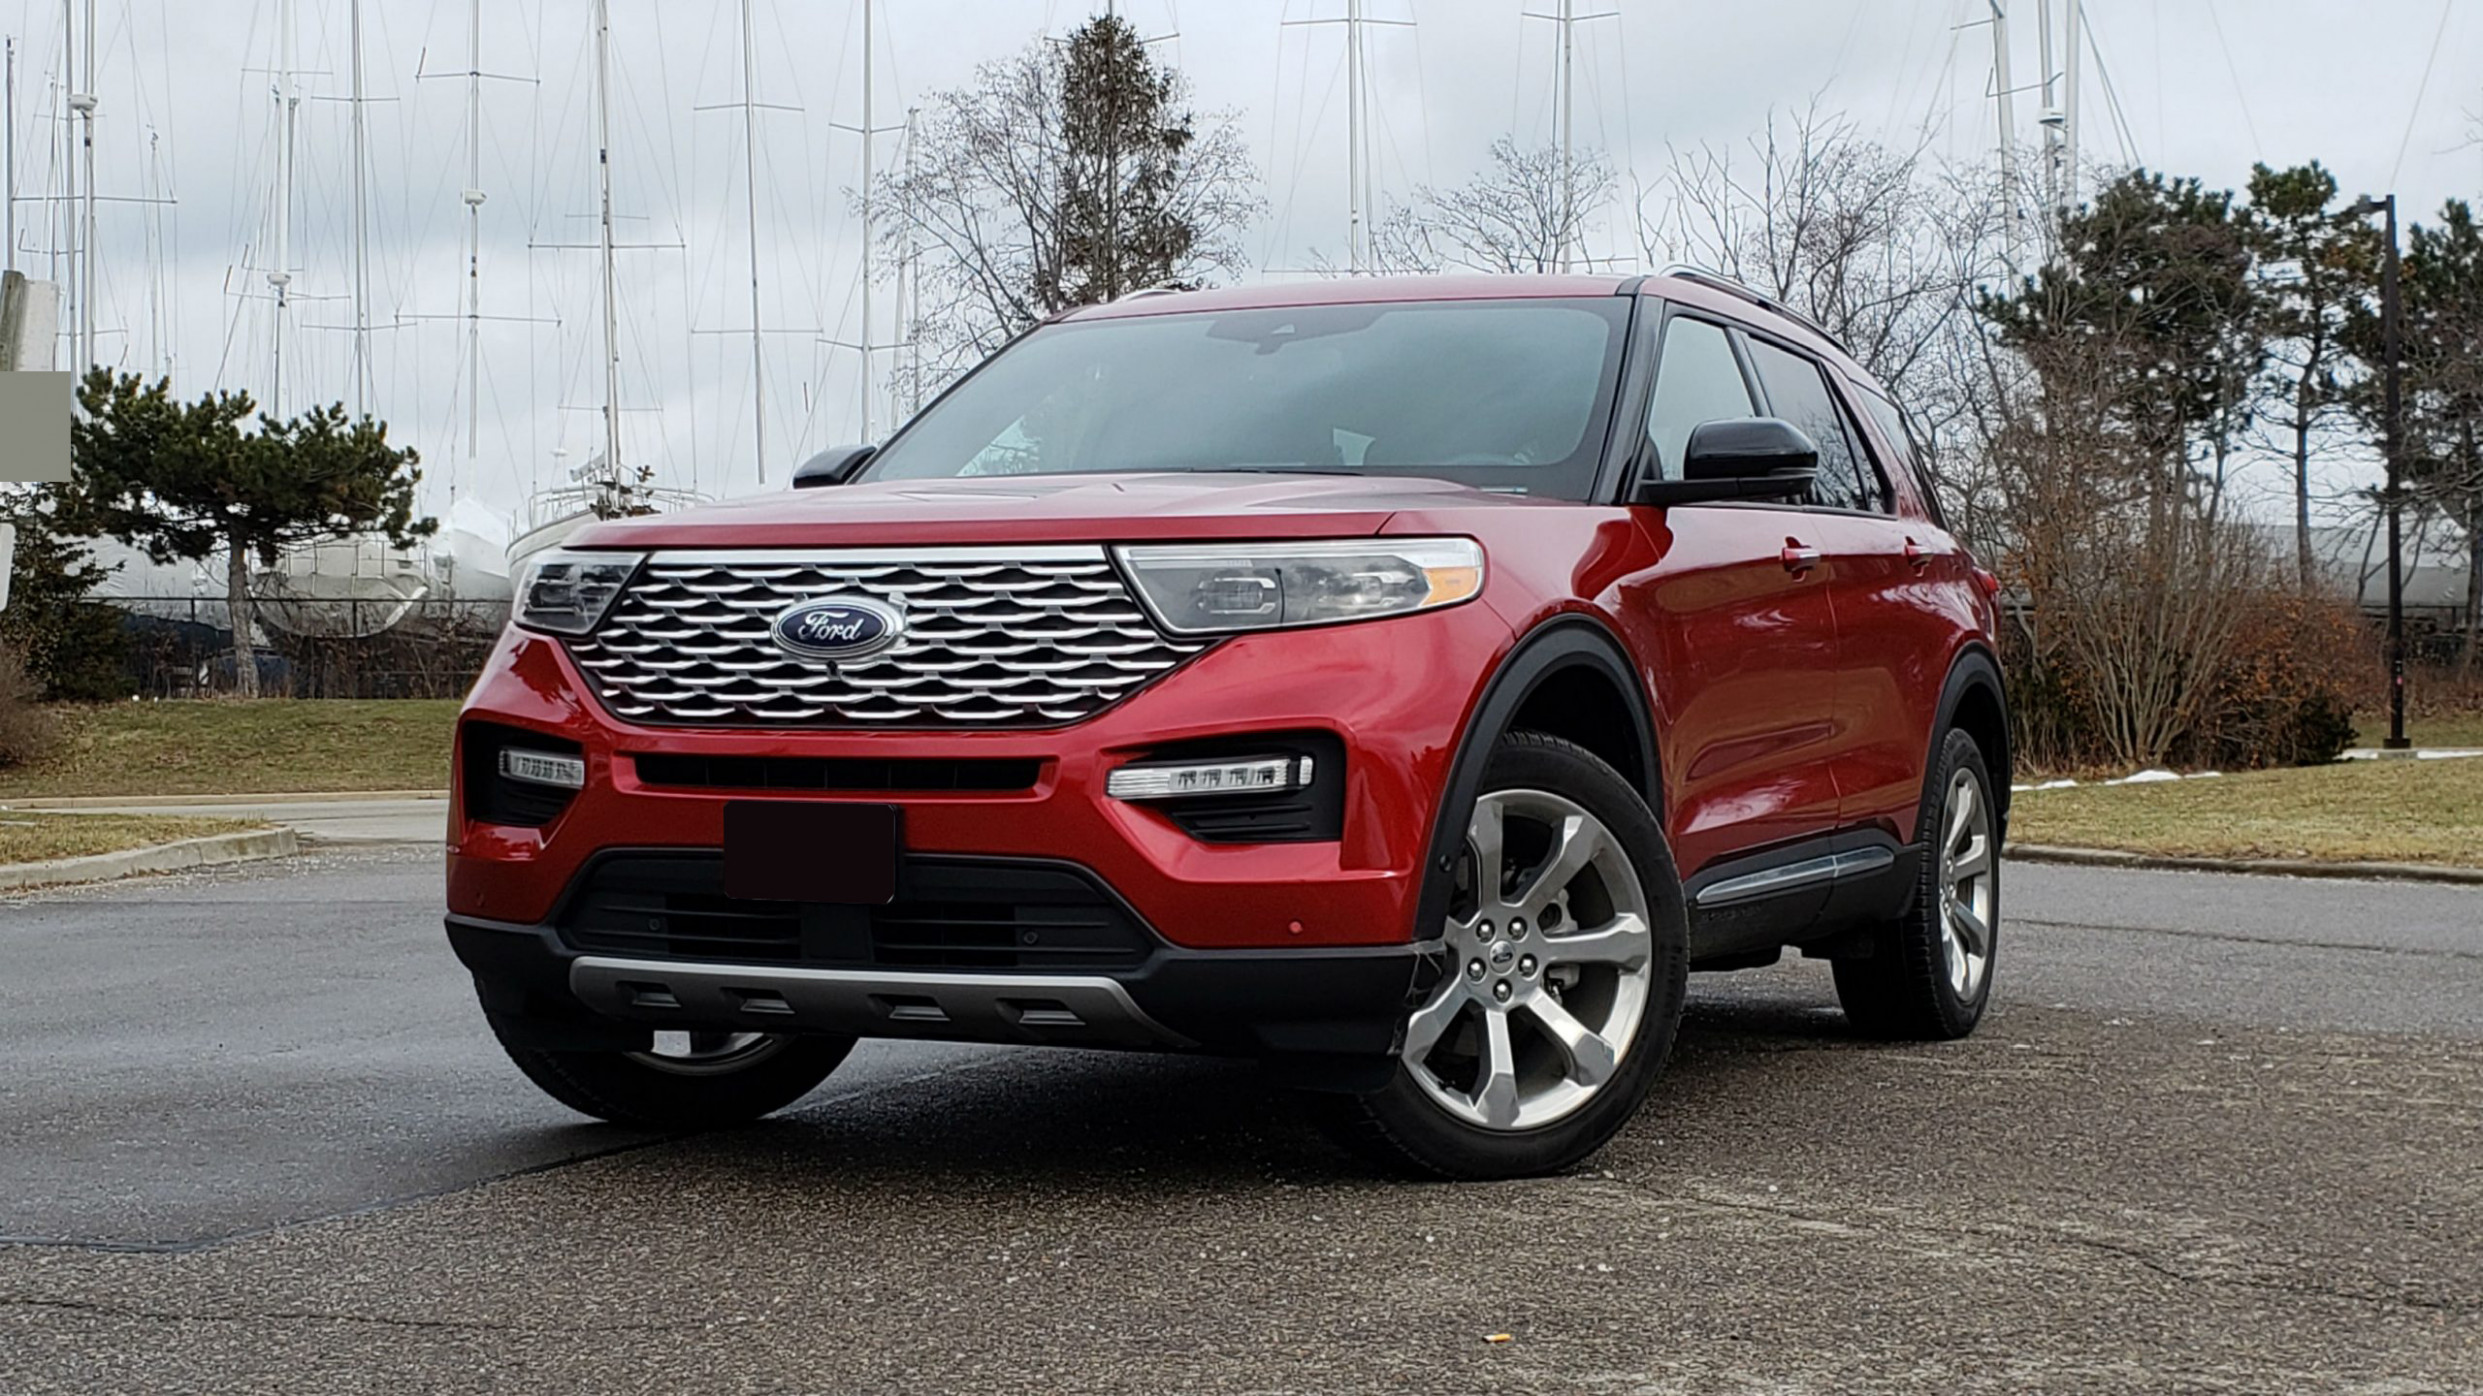 Configurations When Does The 2022 Ford Explorer Come Out